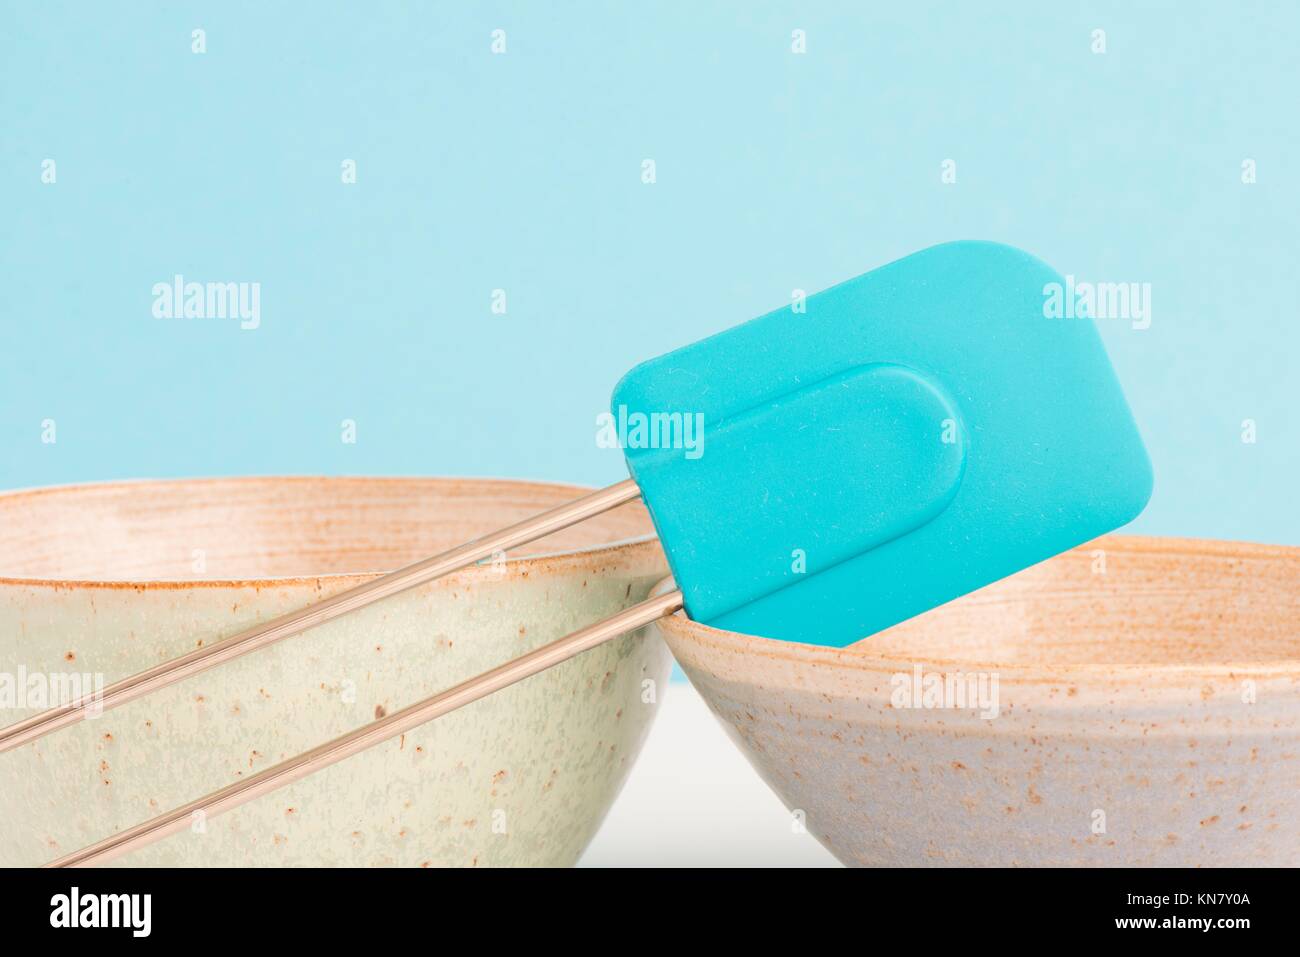 https://c8.alamy.com/comp/KN7Y0A/kitchen-bowl-and-dough-scraper-on-table-concept-of-baking-cooking-KN7Y0A.jpg